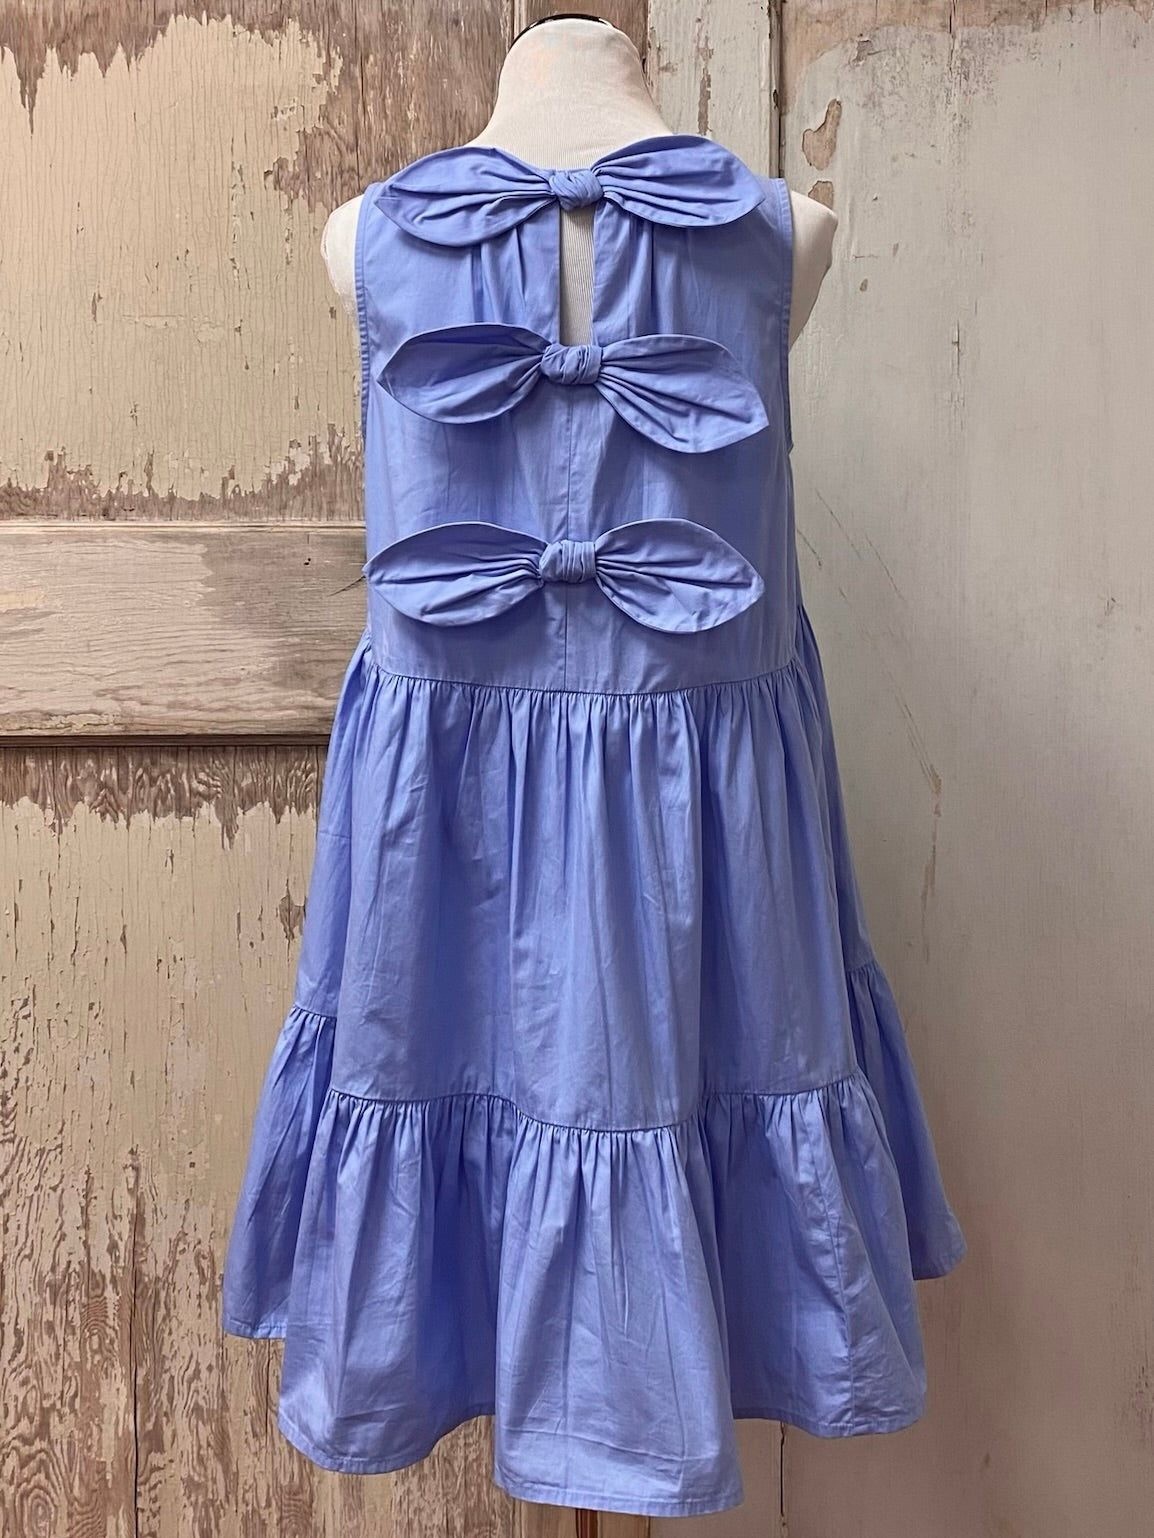 Periwinkle Bow Dress